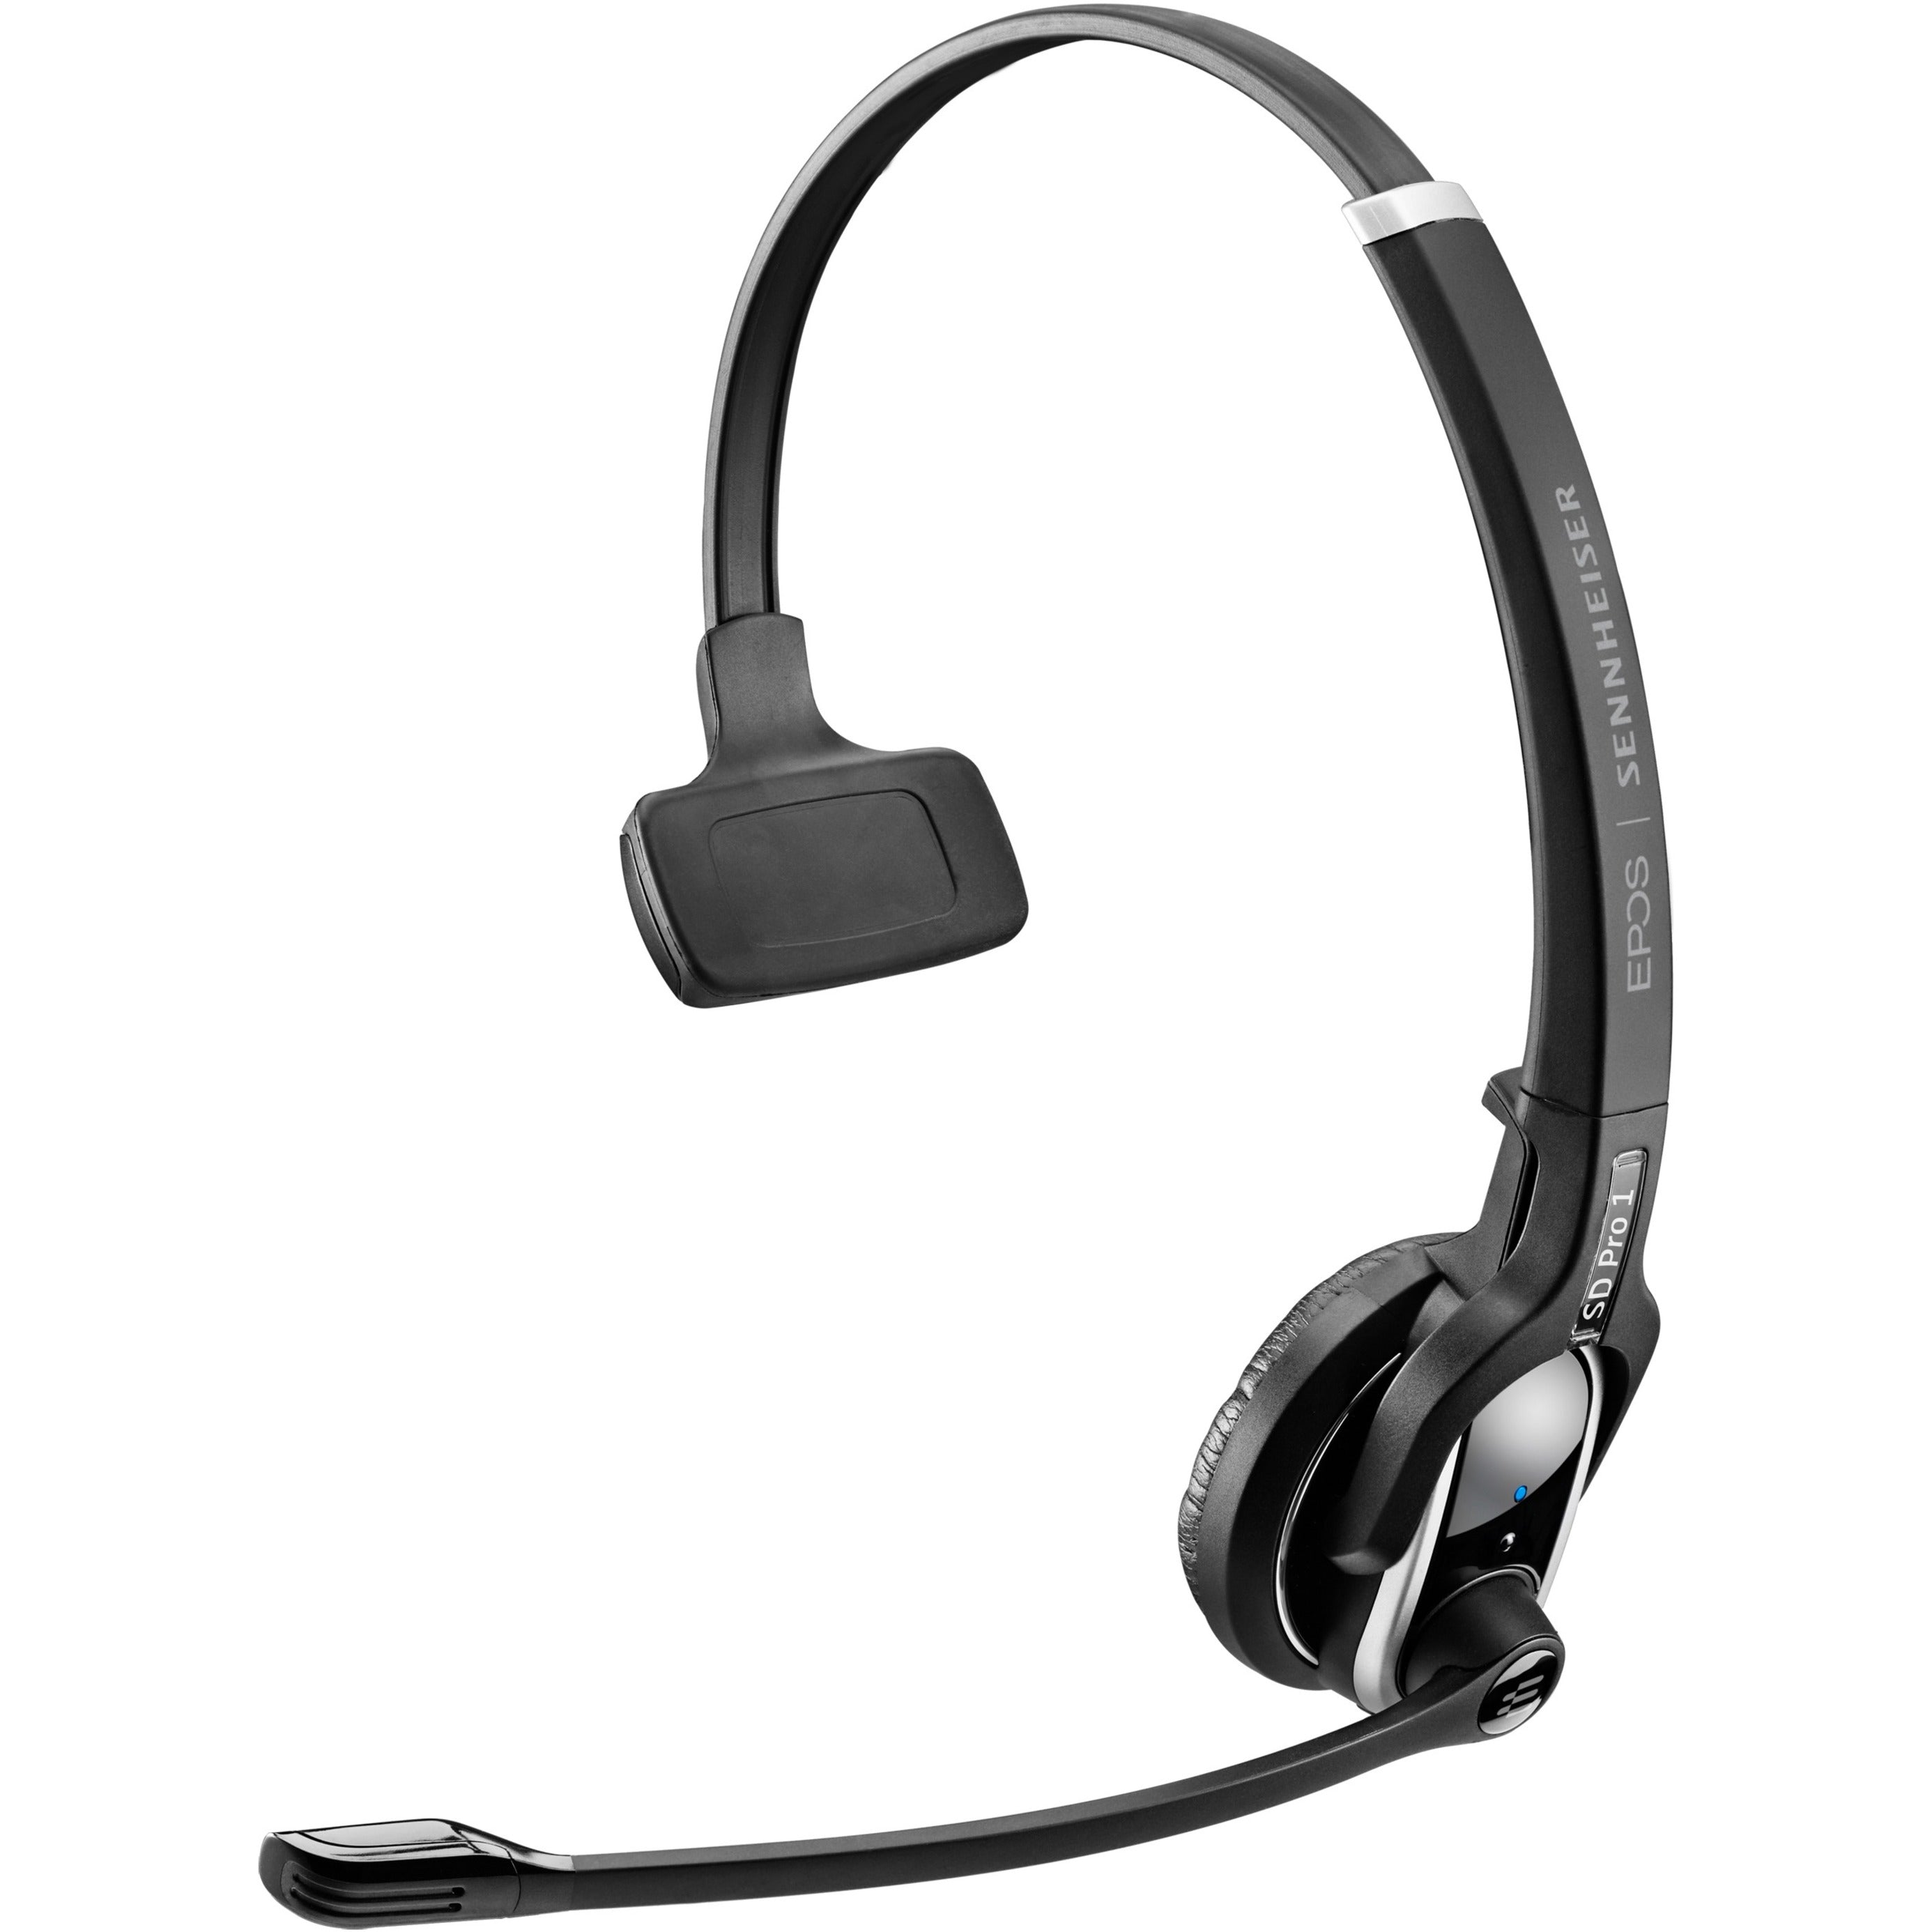 EPOS | SENNHEISER 1000559 IMPACT SD 20 HS Headset, Wireless DECT Mono On-ear Headset with Bi-directional Noise Cancelling Microphone